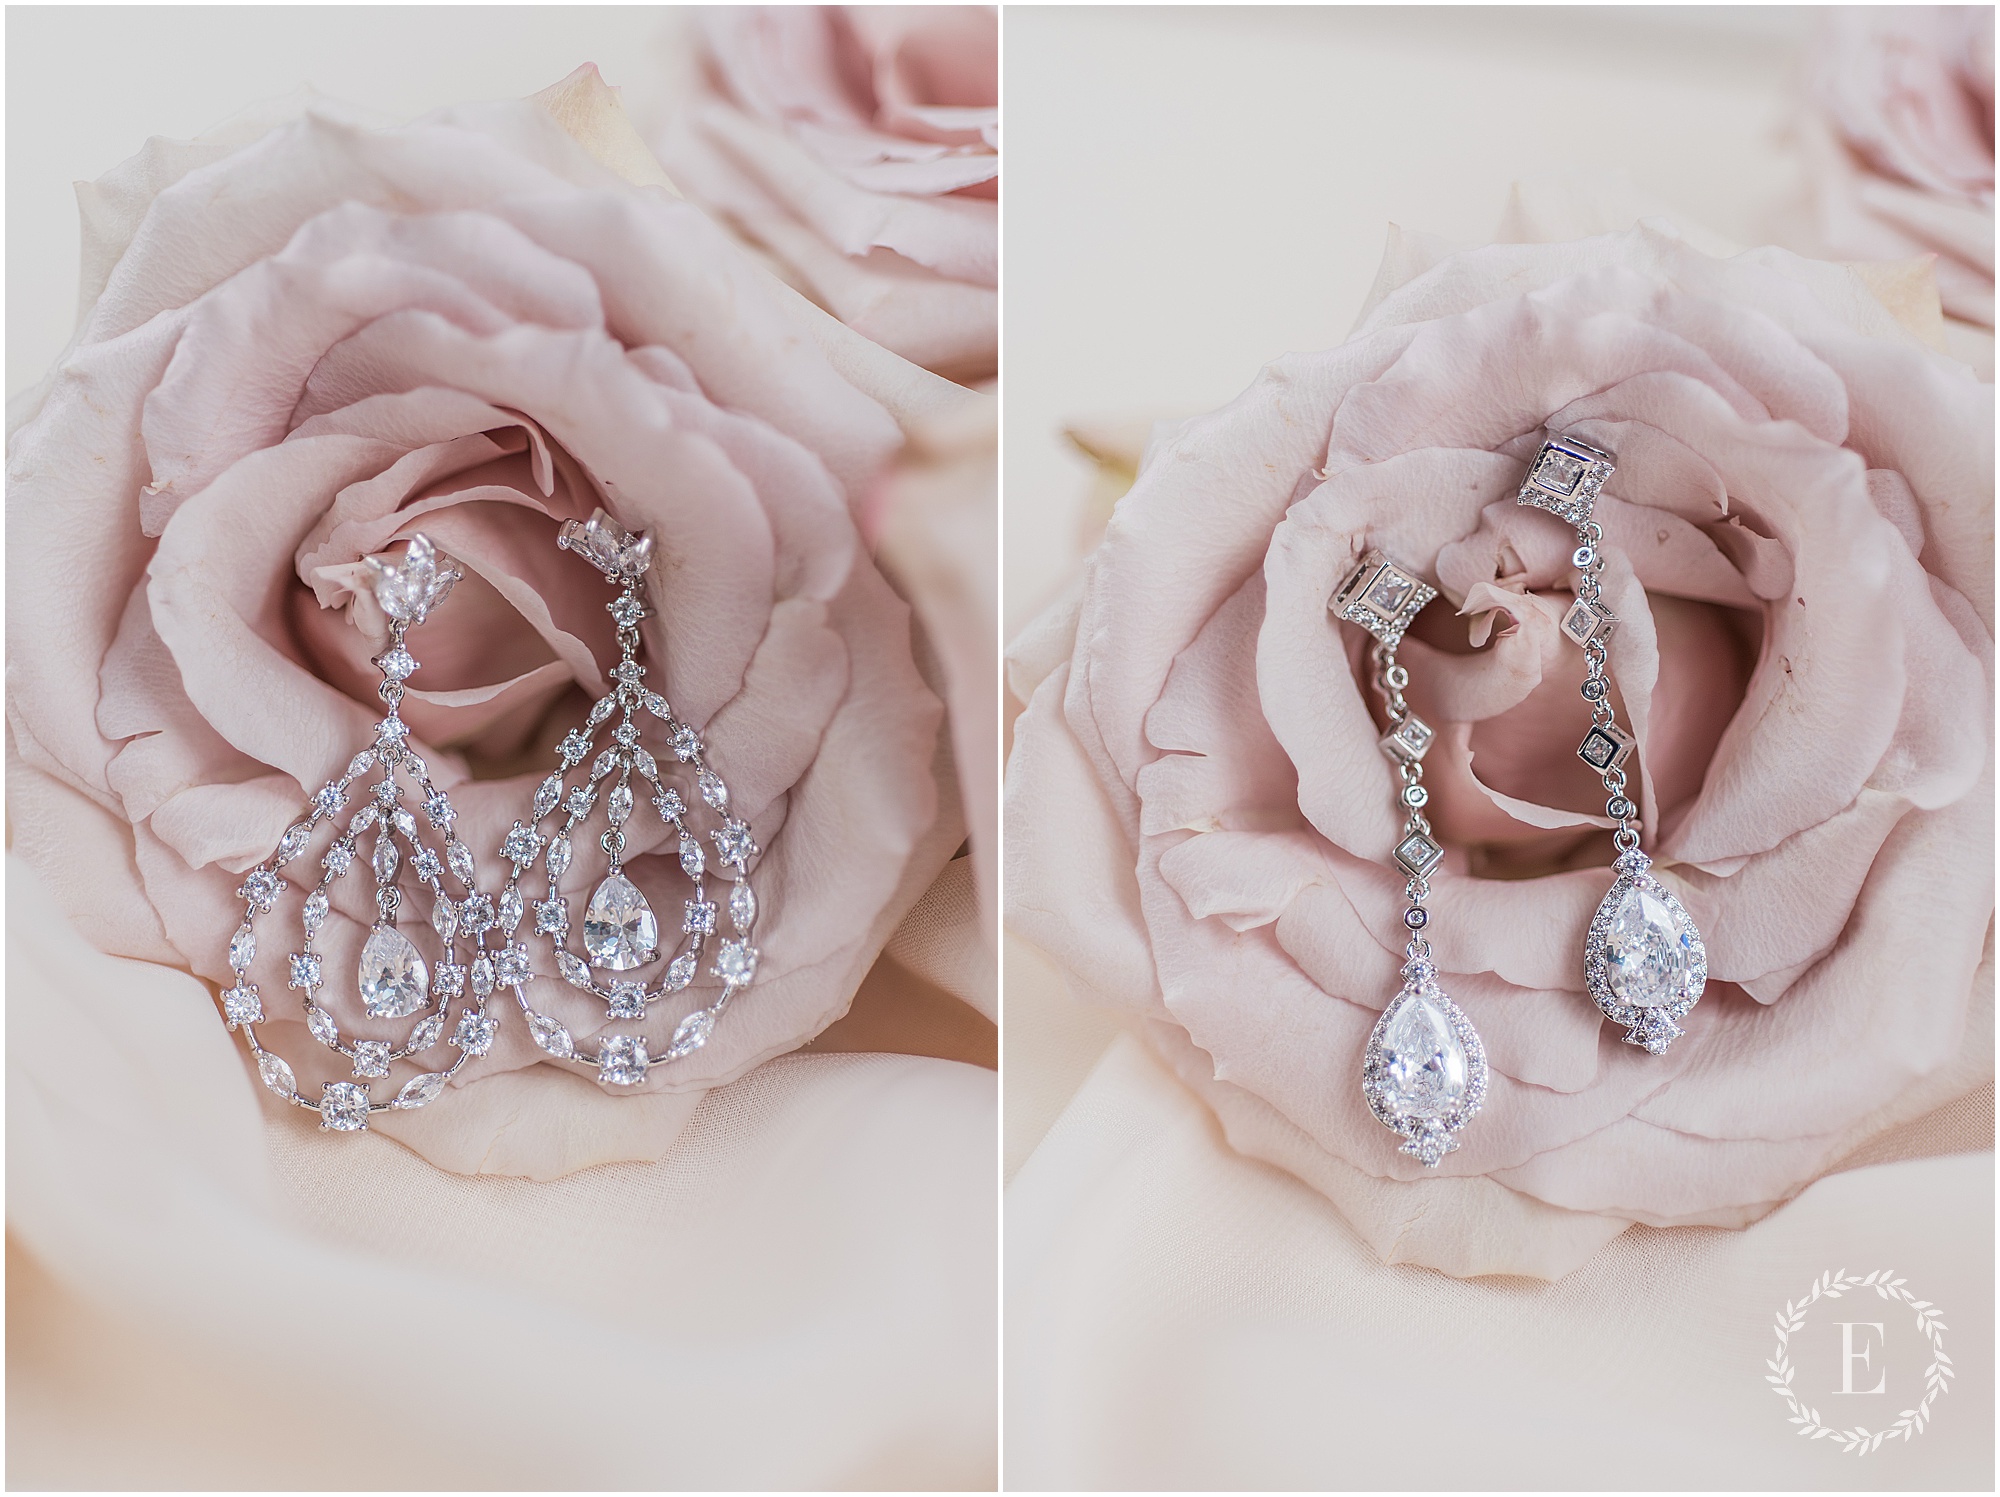 0049 Sugar cane and Co Bridesmaids Earrings - Photography by Emma.jpg